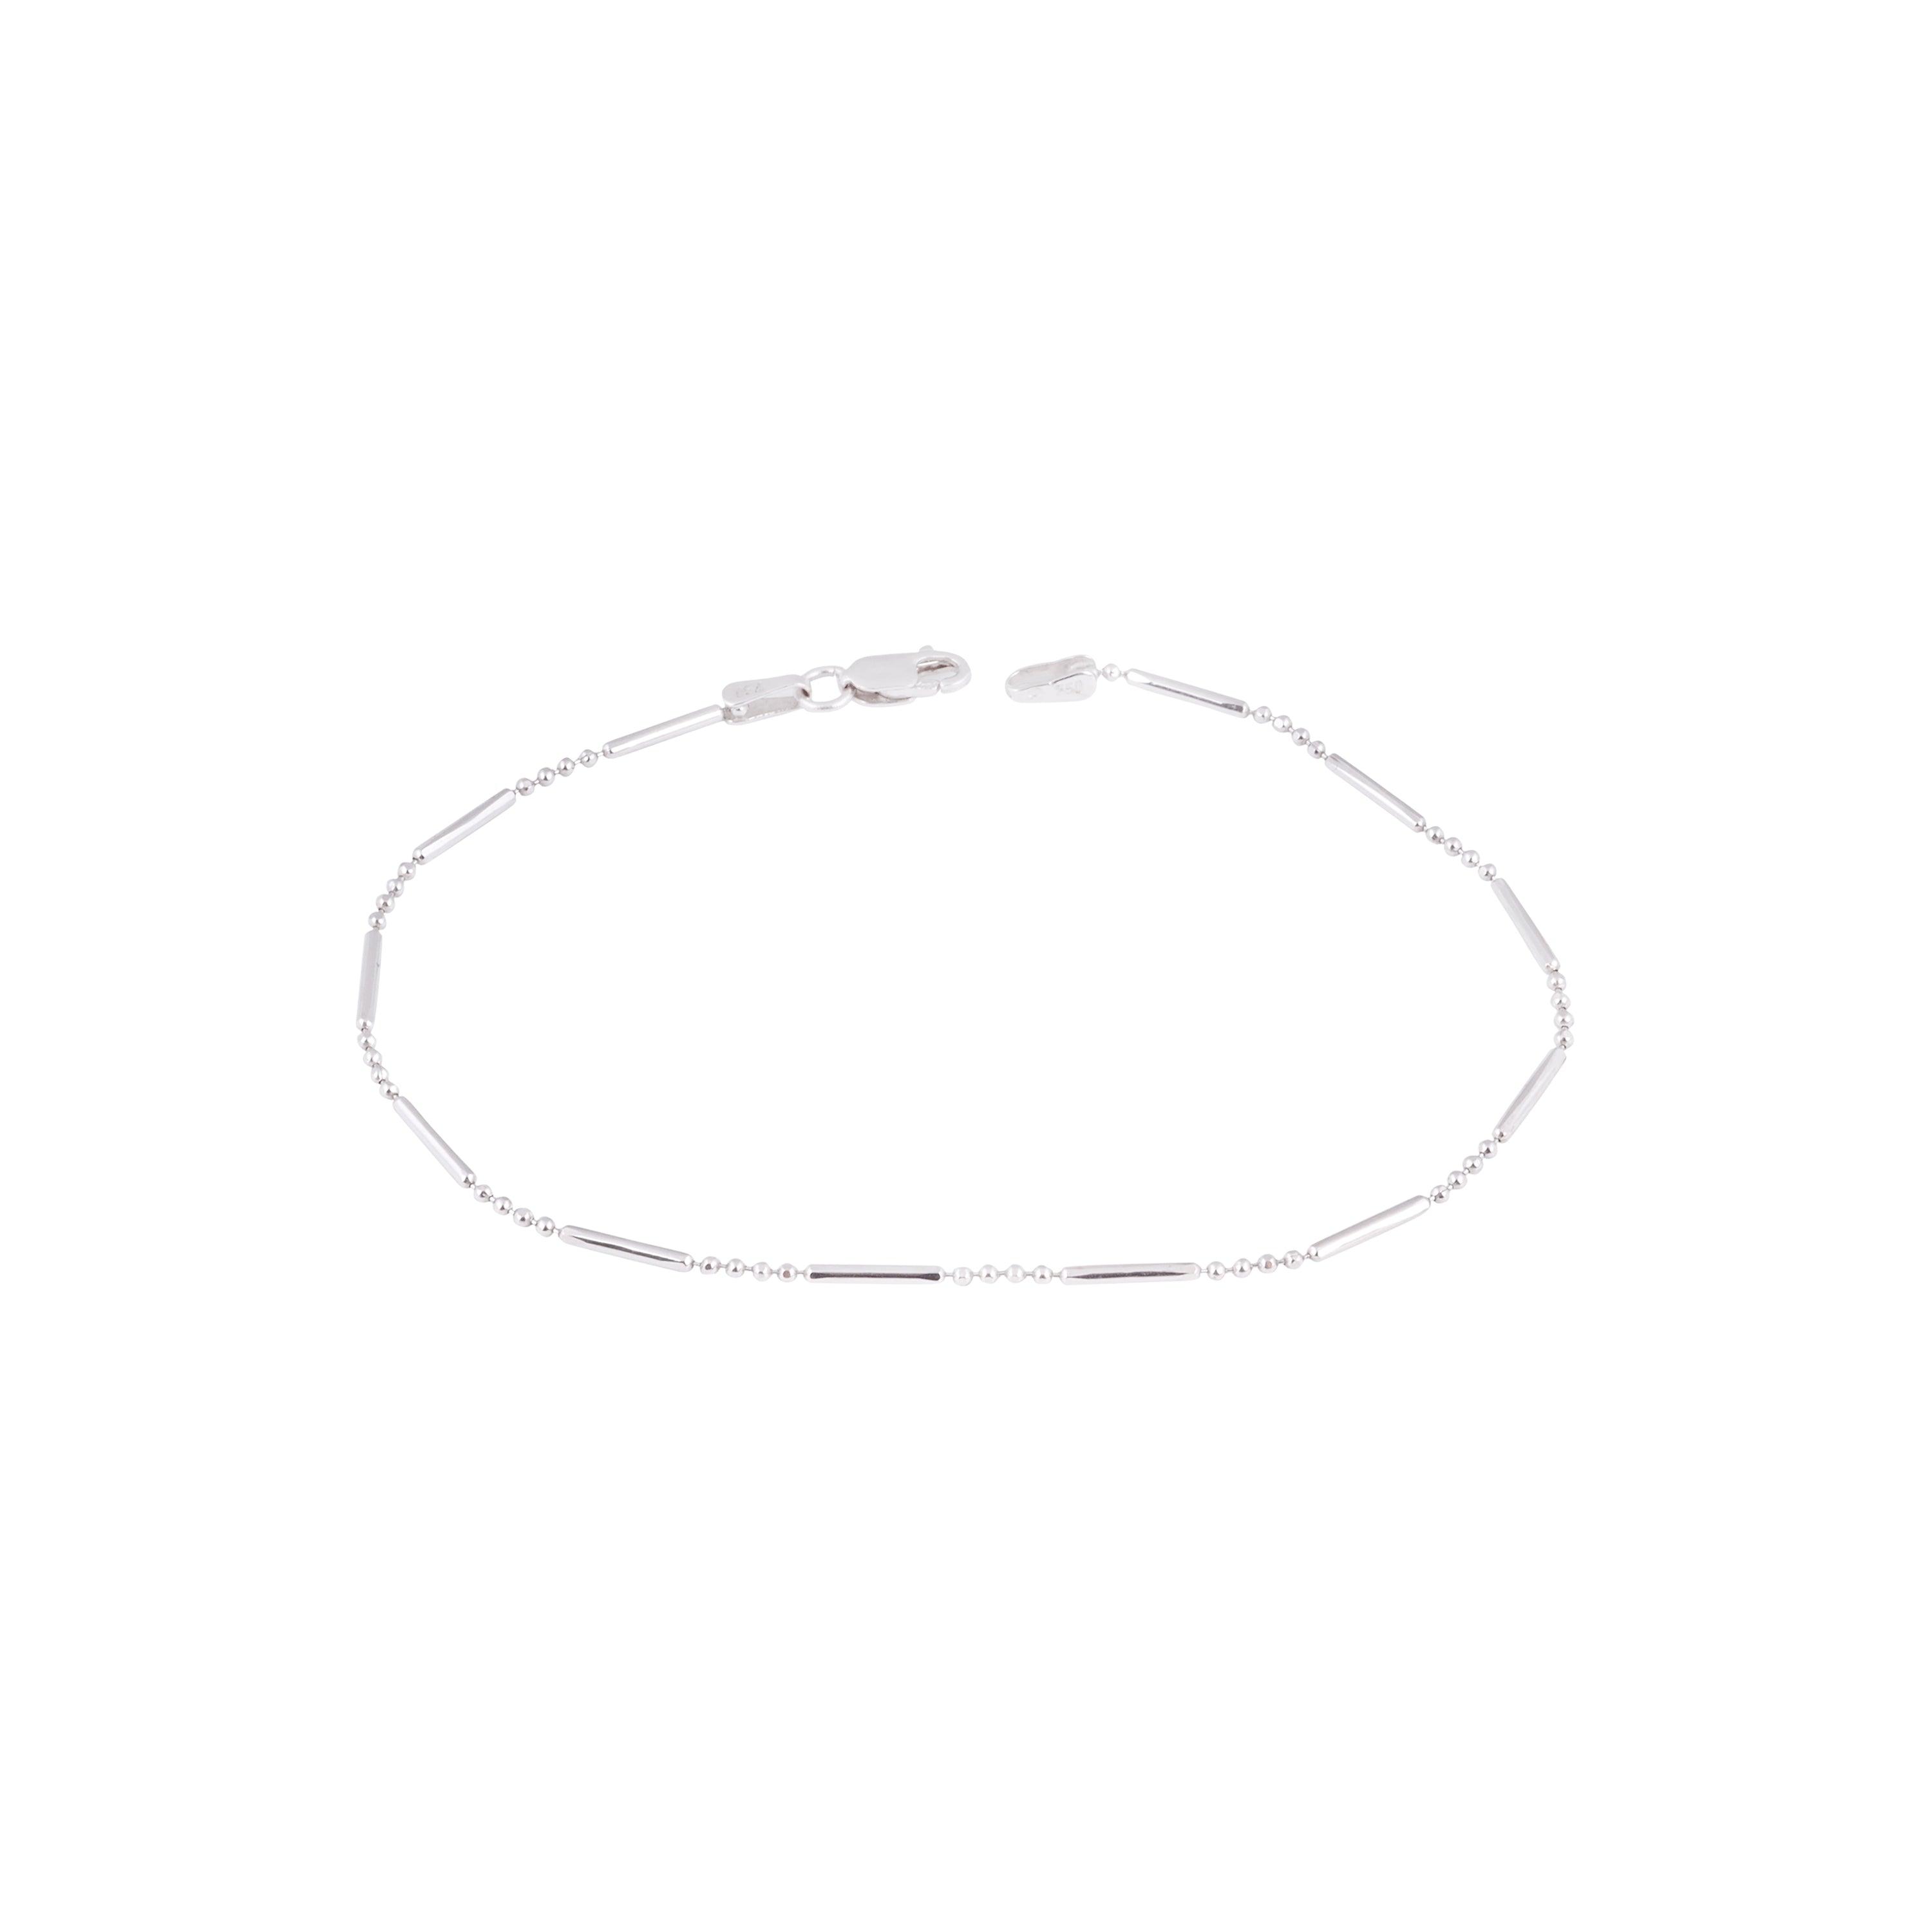 18ct White Gold Minimal Bracelet with Lobster Clasp LBR-8522 - Minar Jewellers